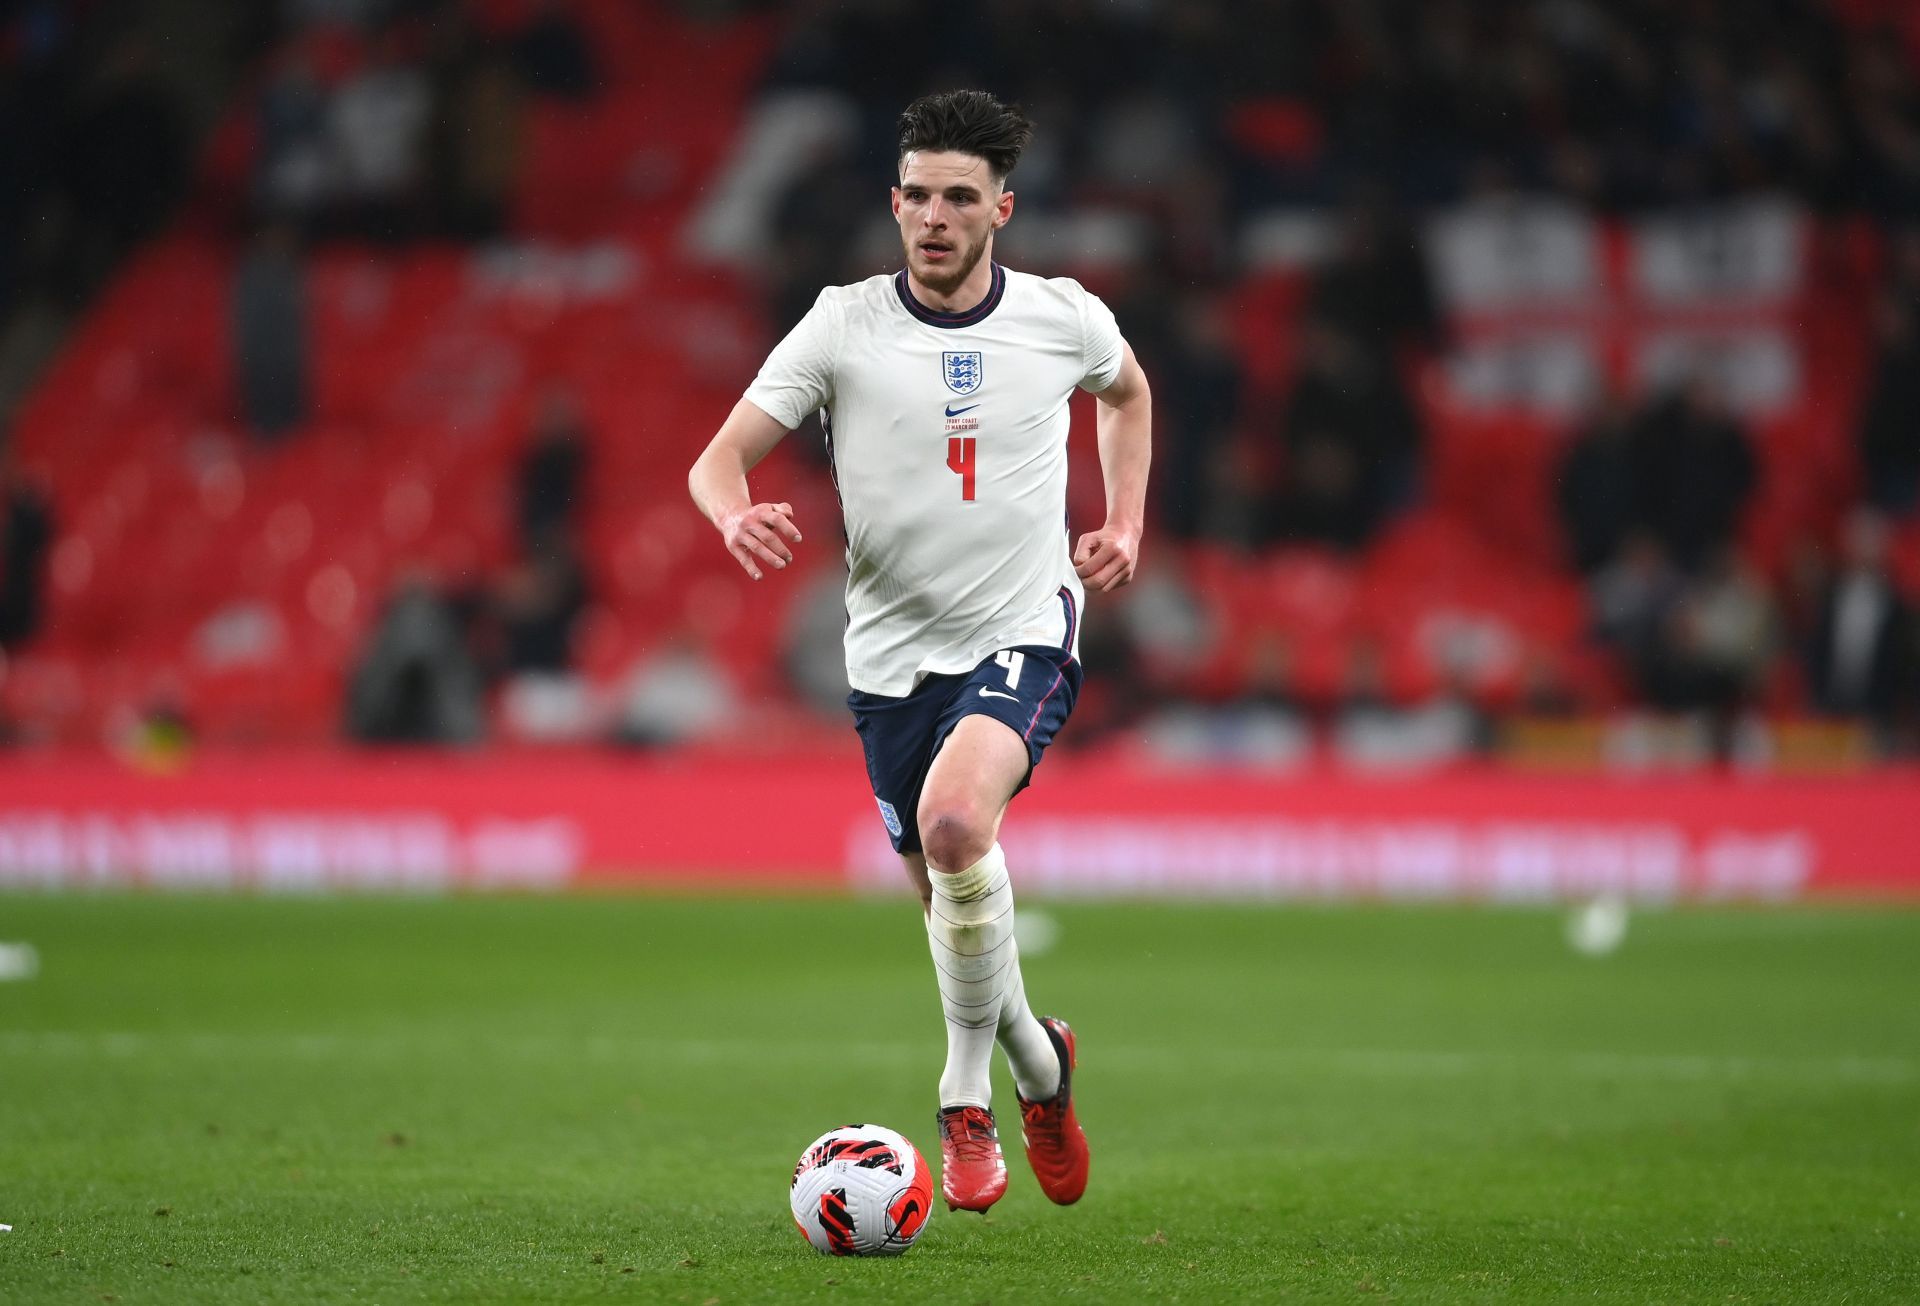 Declan Rice drives forward with the ball from midfield.